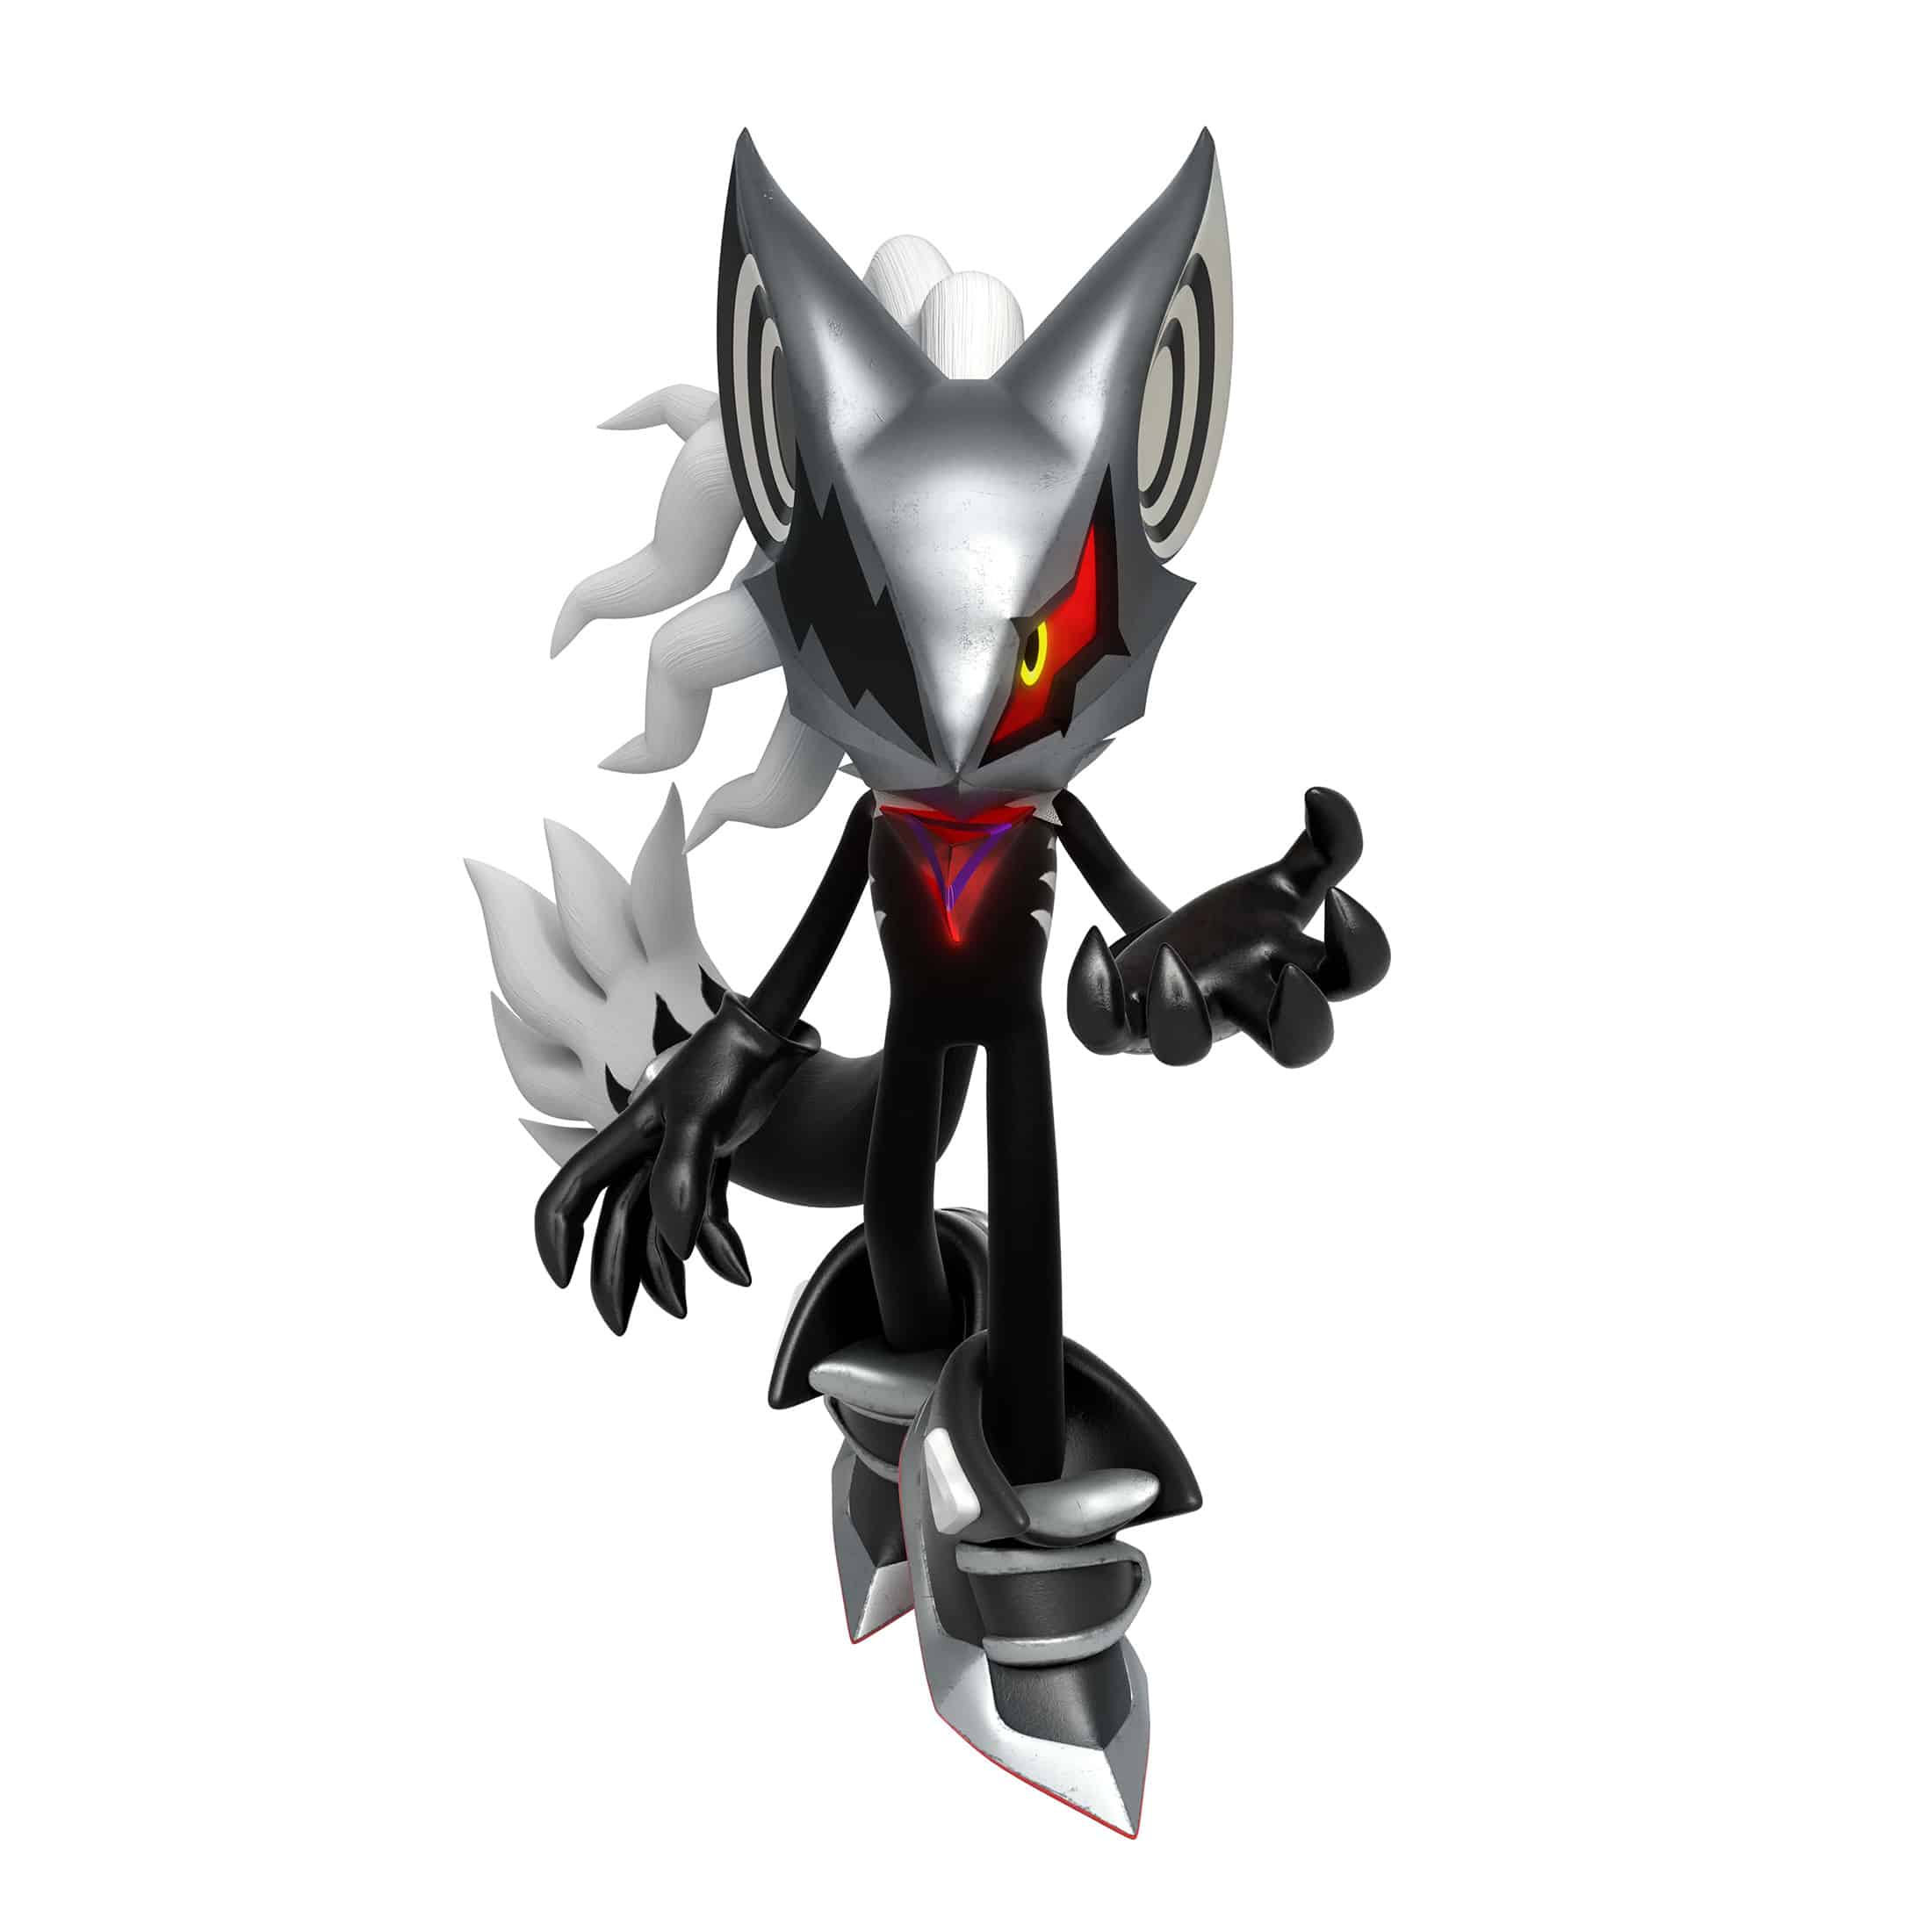 sonic forces speed battle favorite character